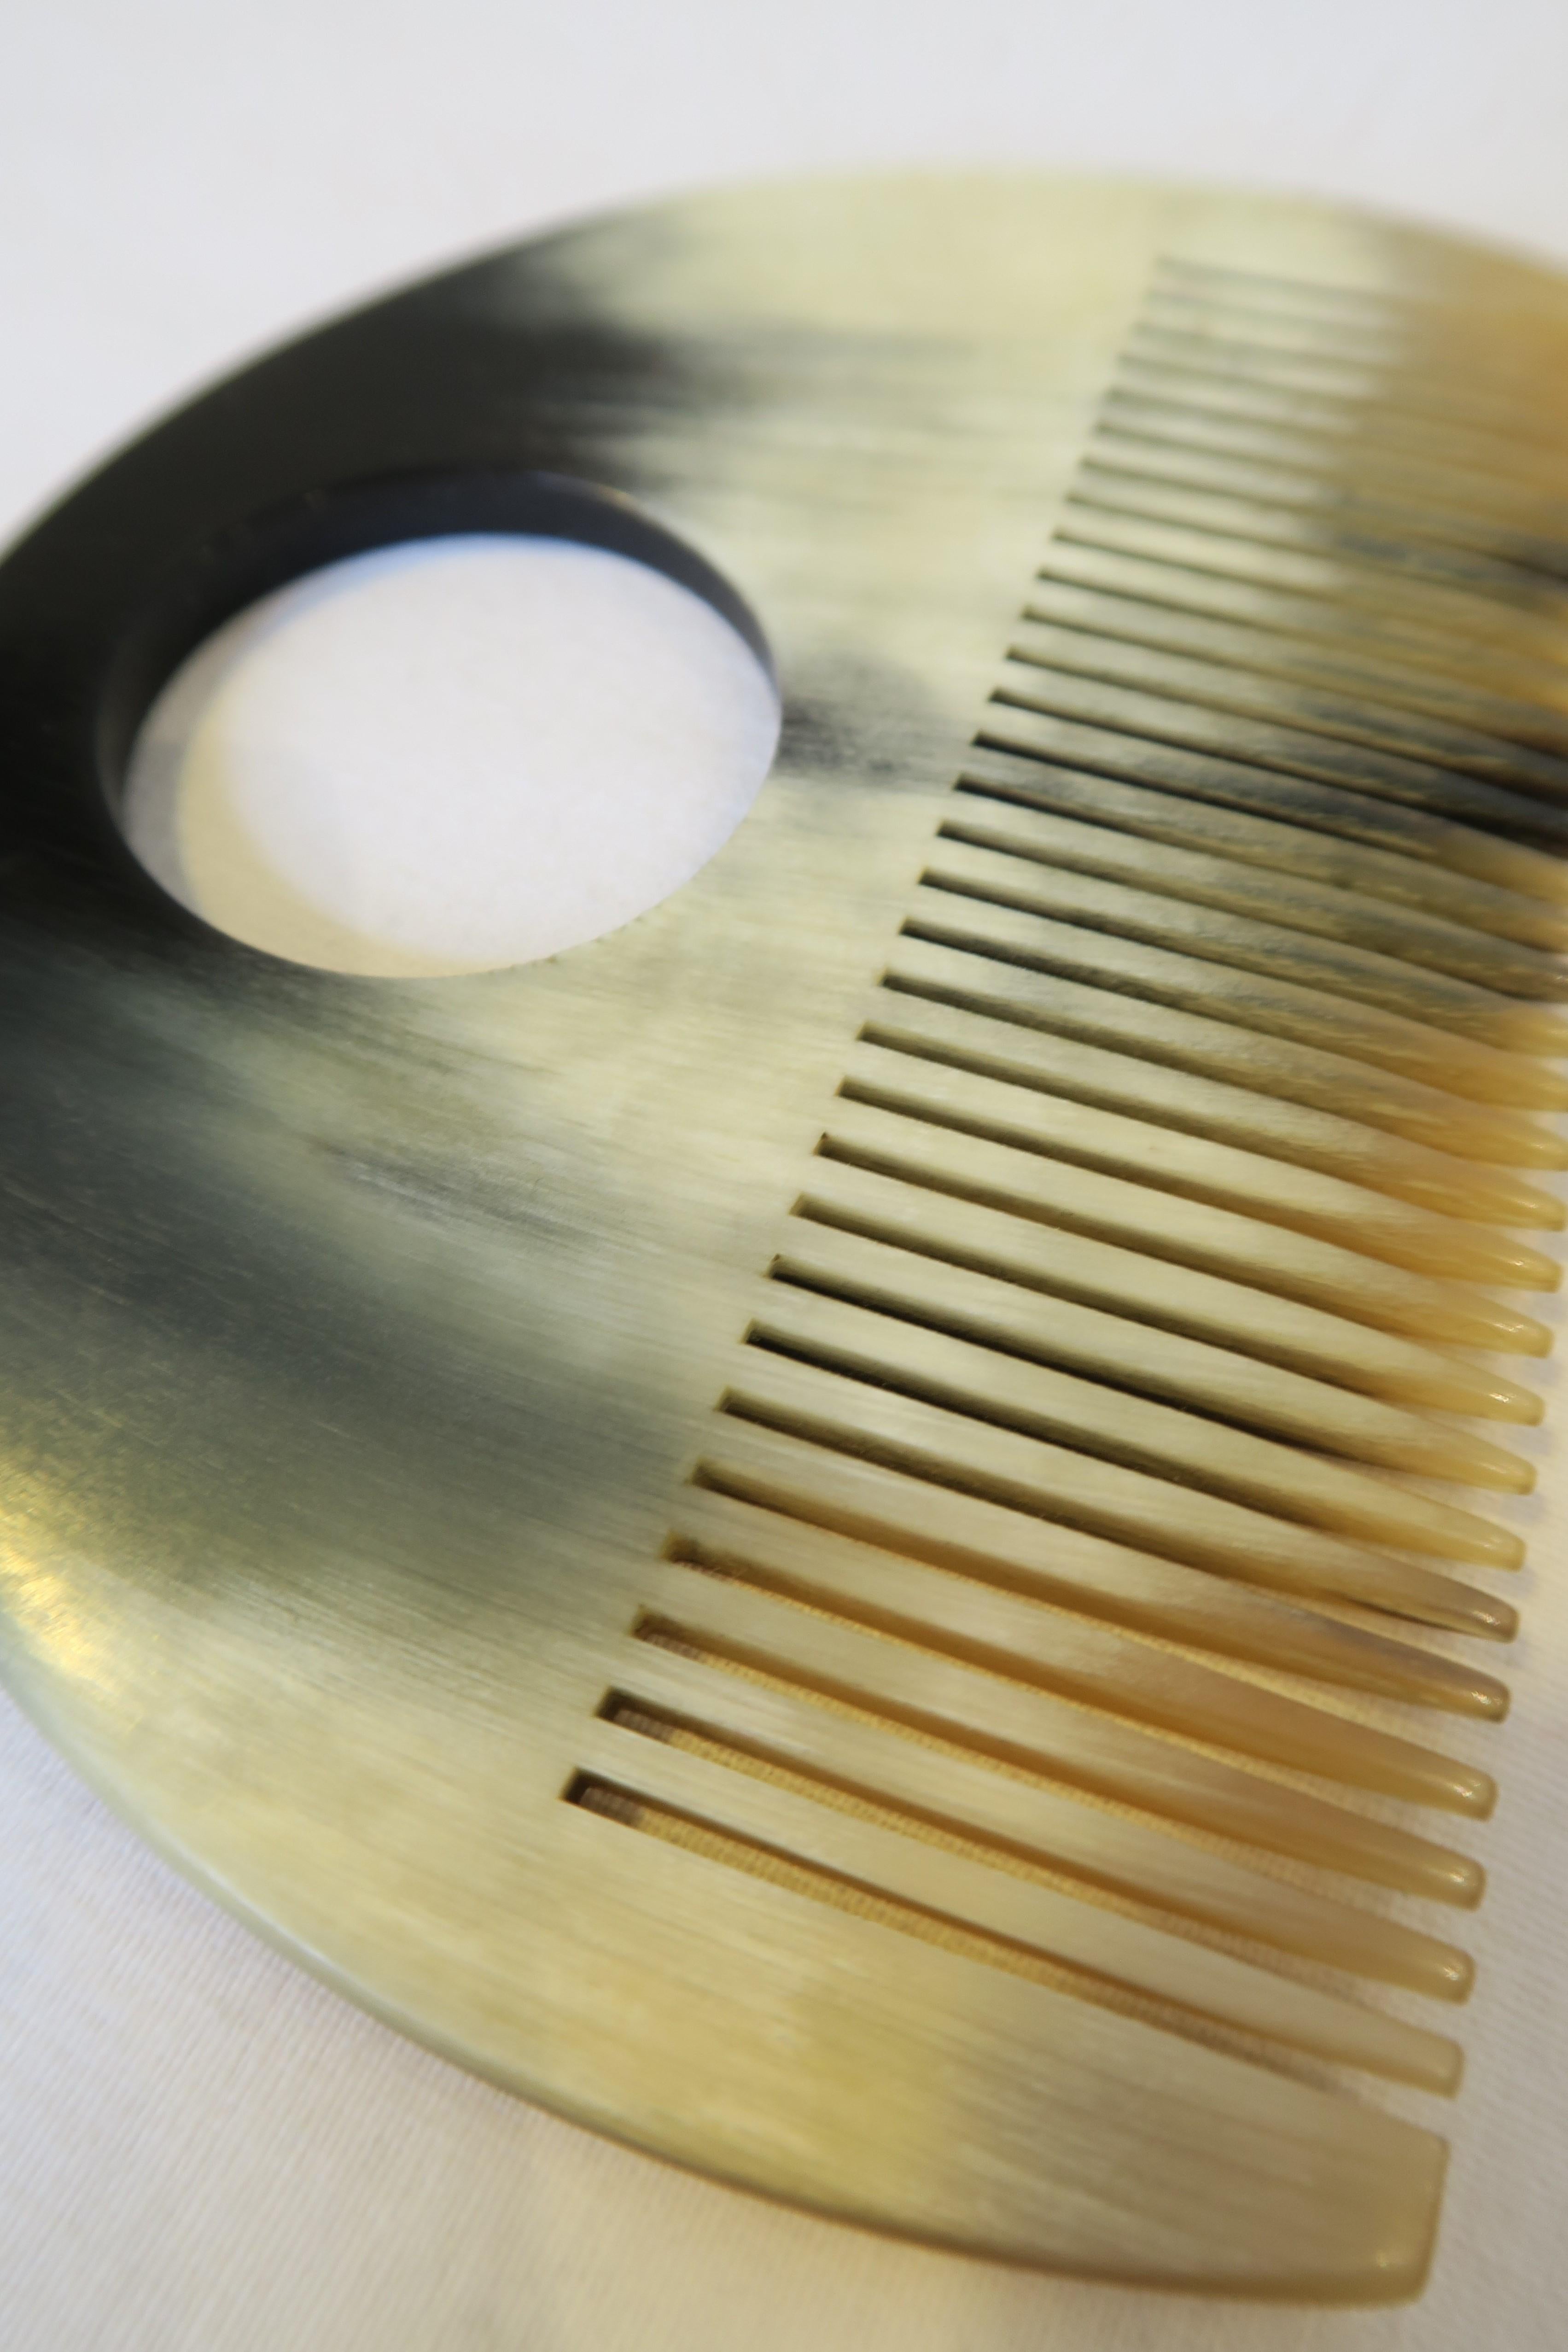 For sale is a beautiful half-moon shaped comb. The item was hand-crafted from horn and designed by the renowned workshops of Carl Auböck in Austria. It's a remarkable example of the typical form-follows-function-style of the 50s and German Bauhaus,